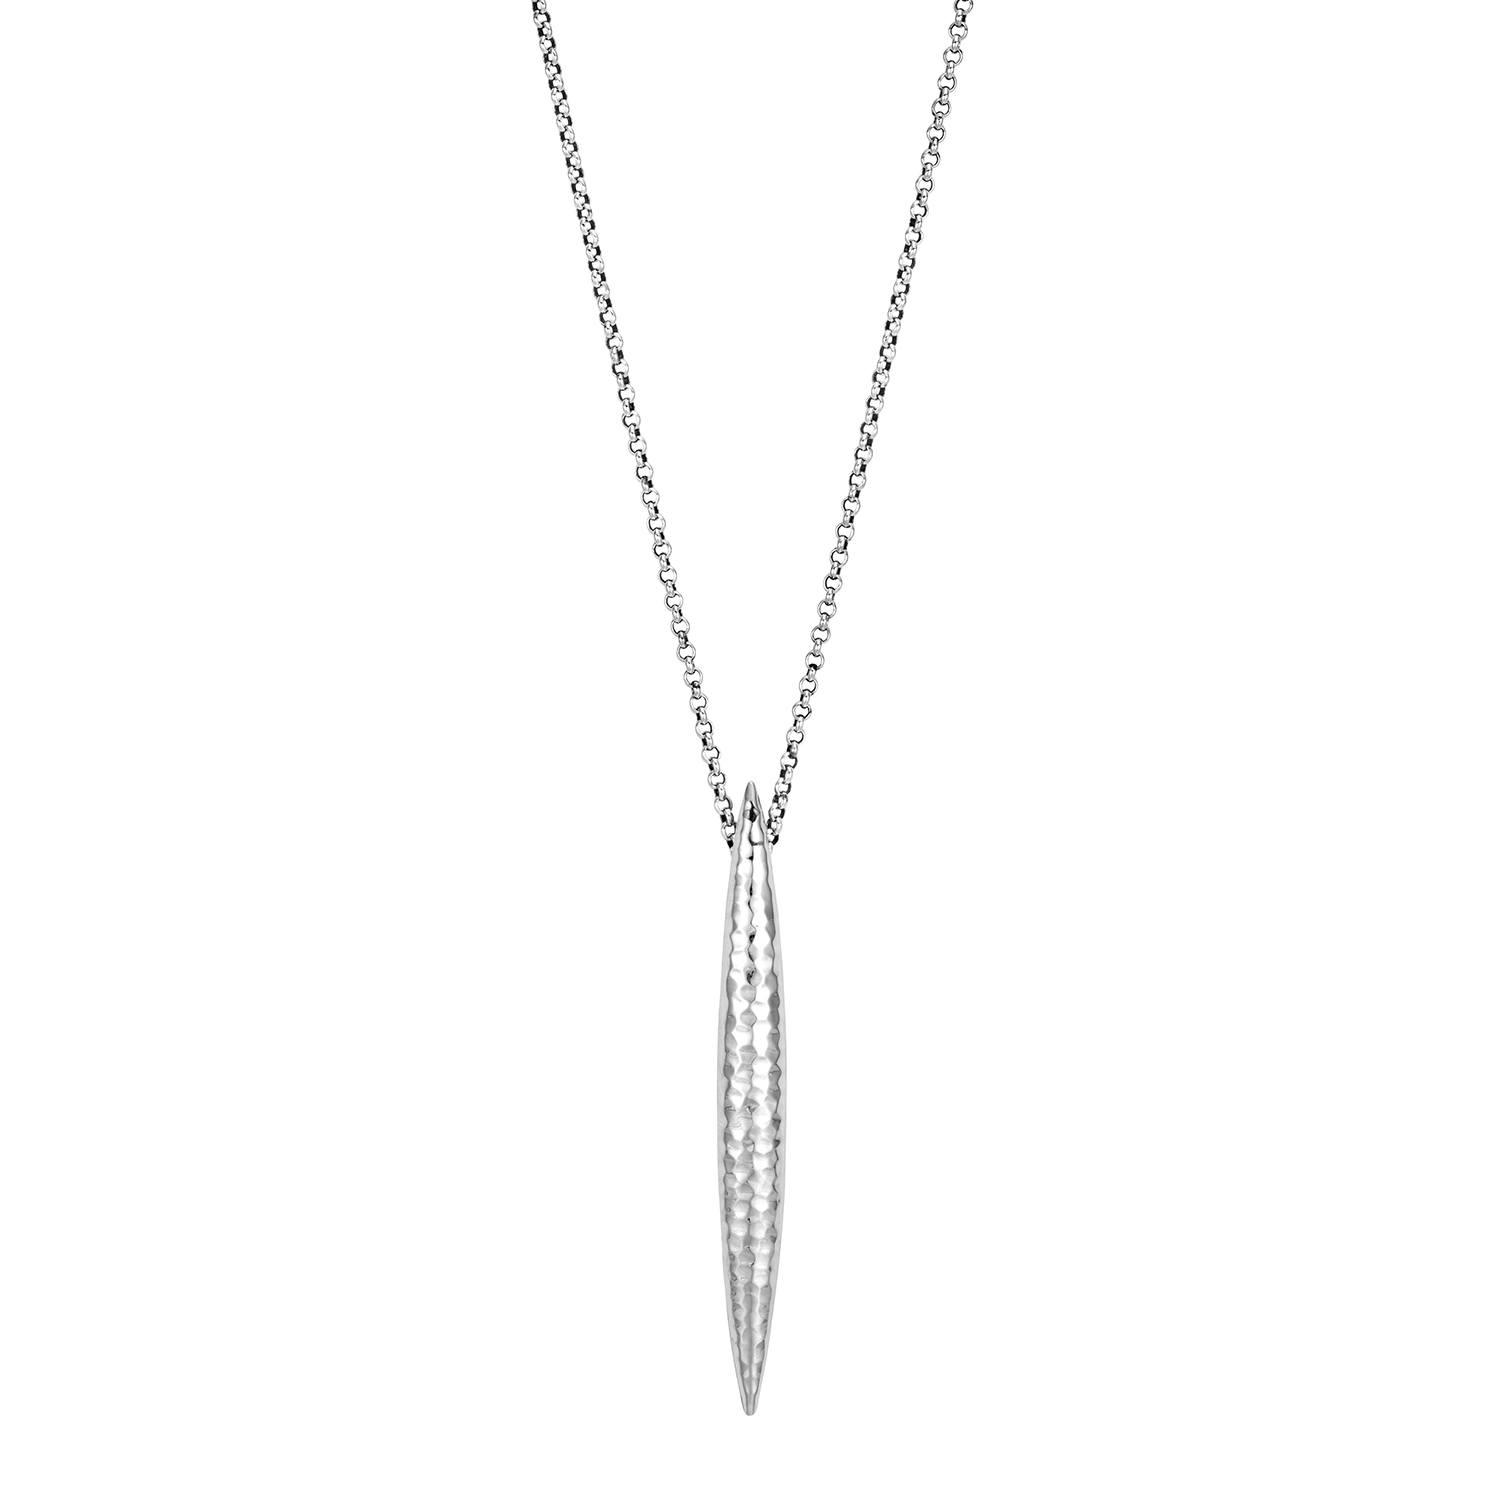 John Hardy Sterling Silver Hammered Spear Pendant Necklace